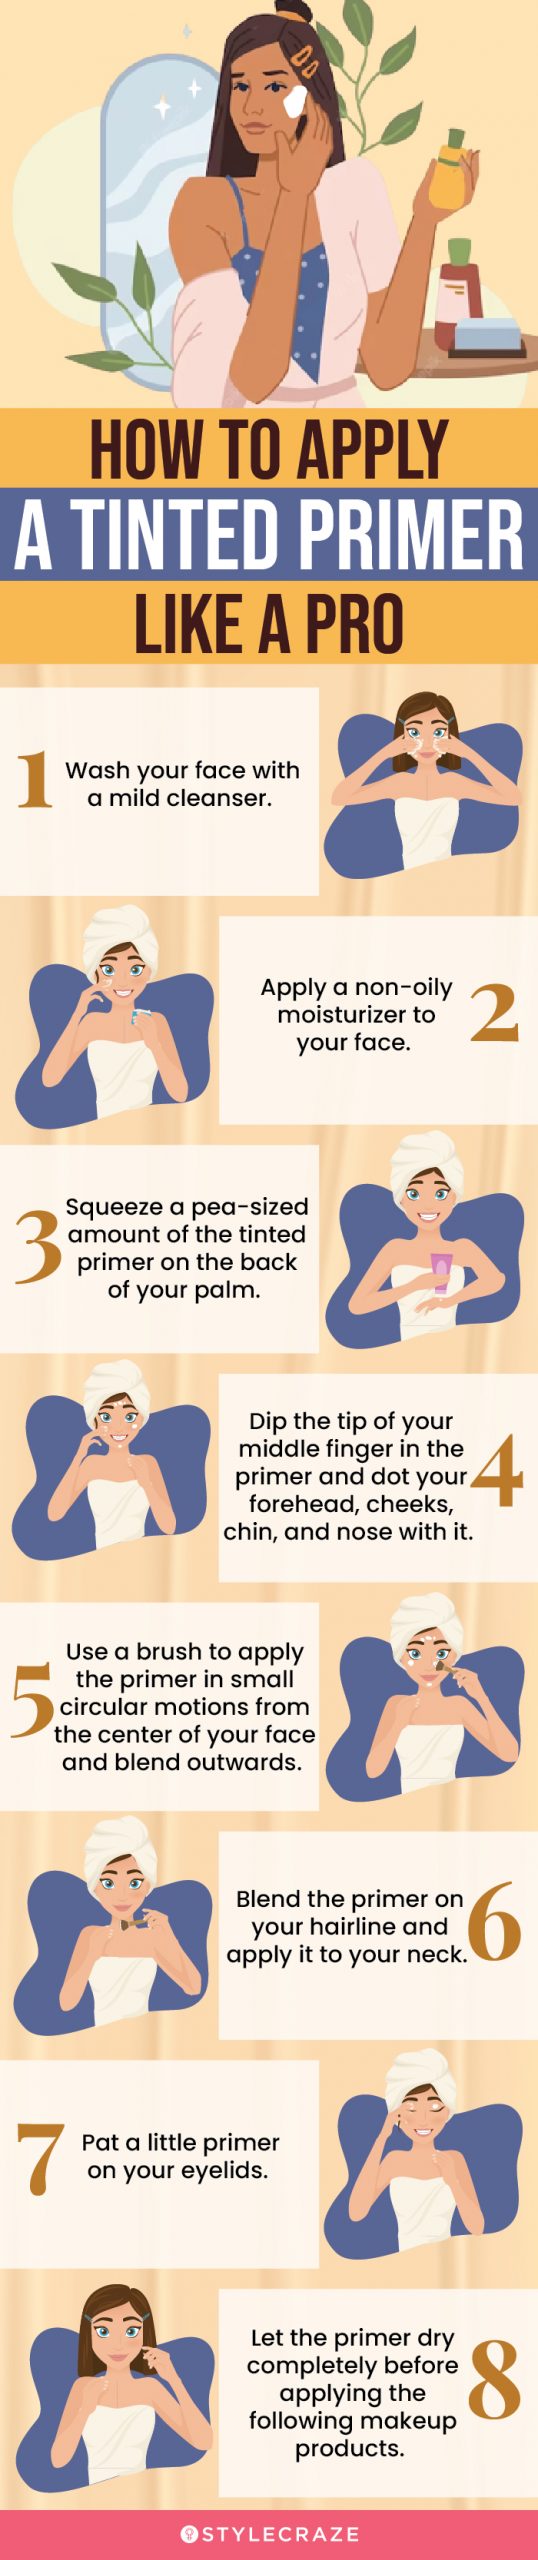 How To Apply A Tinted Primer Like A Pro (infographic)